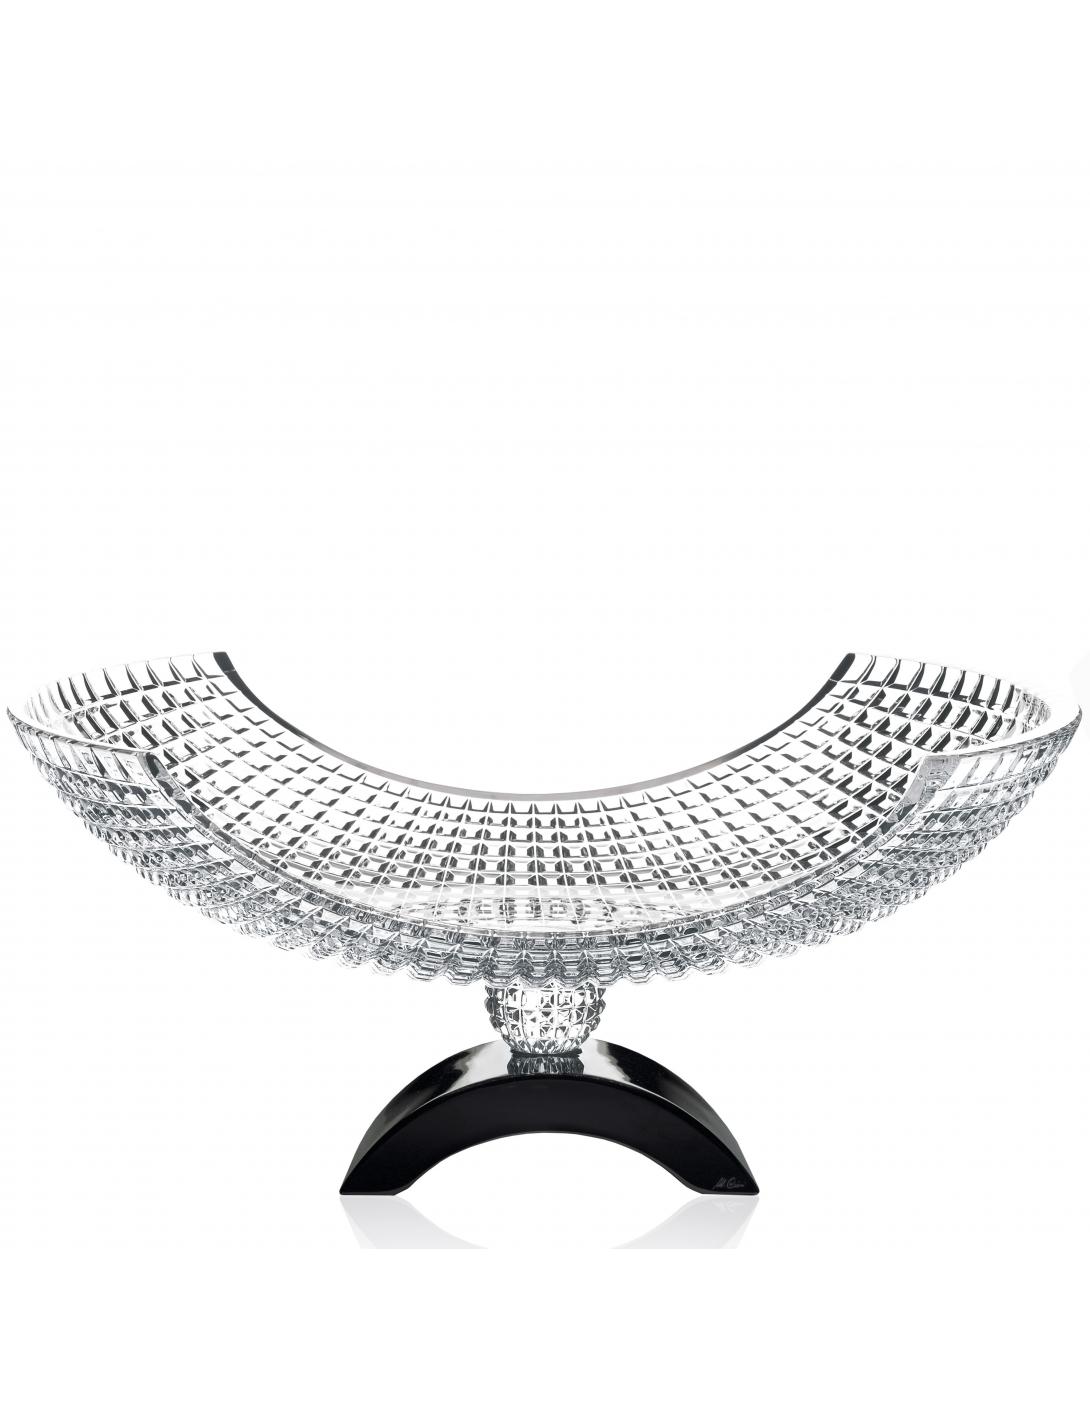 Luxe XXL Arched Centerpiece Mario Cioni

A centrepiece with the characteristic shape of the Diapason and an imposing size. The side, in clear crystal, is traversed by a dense weave of vertical and horizontal engravings made entirely by hand by